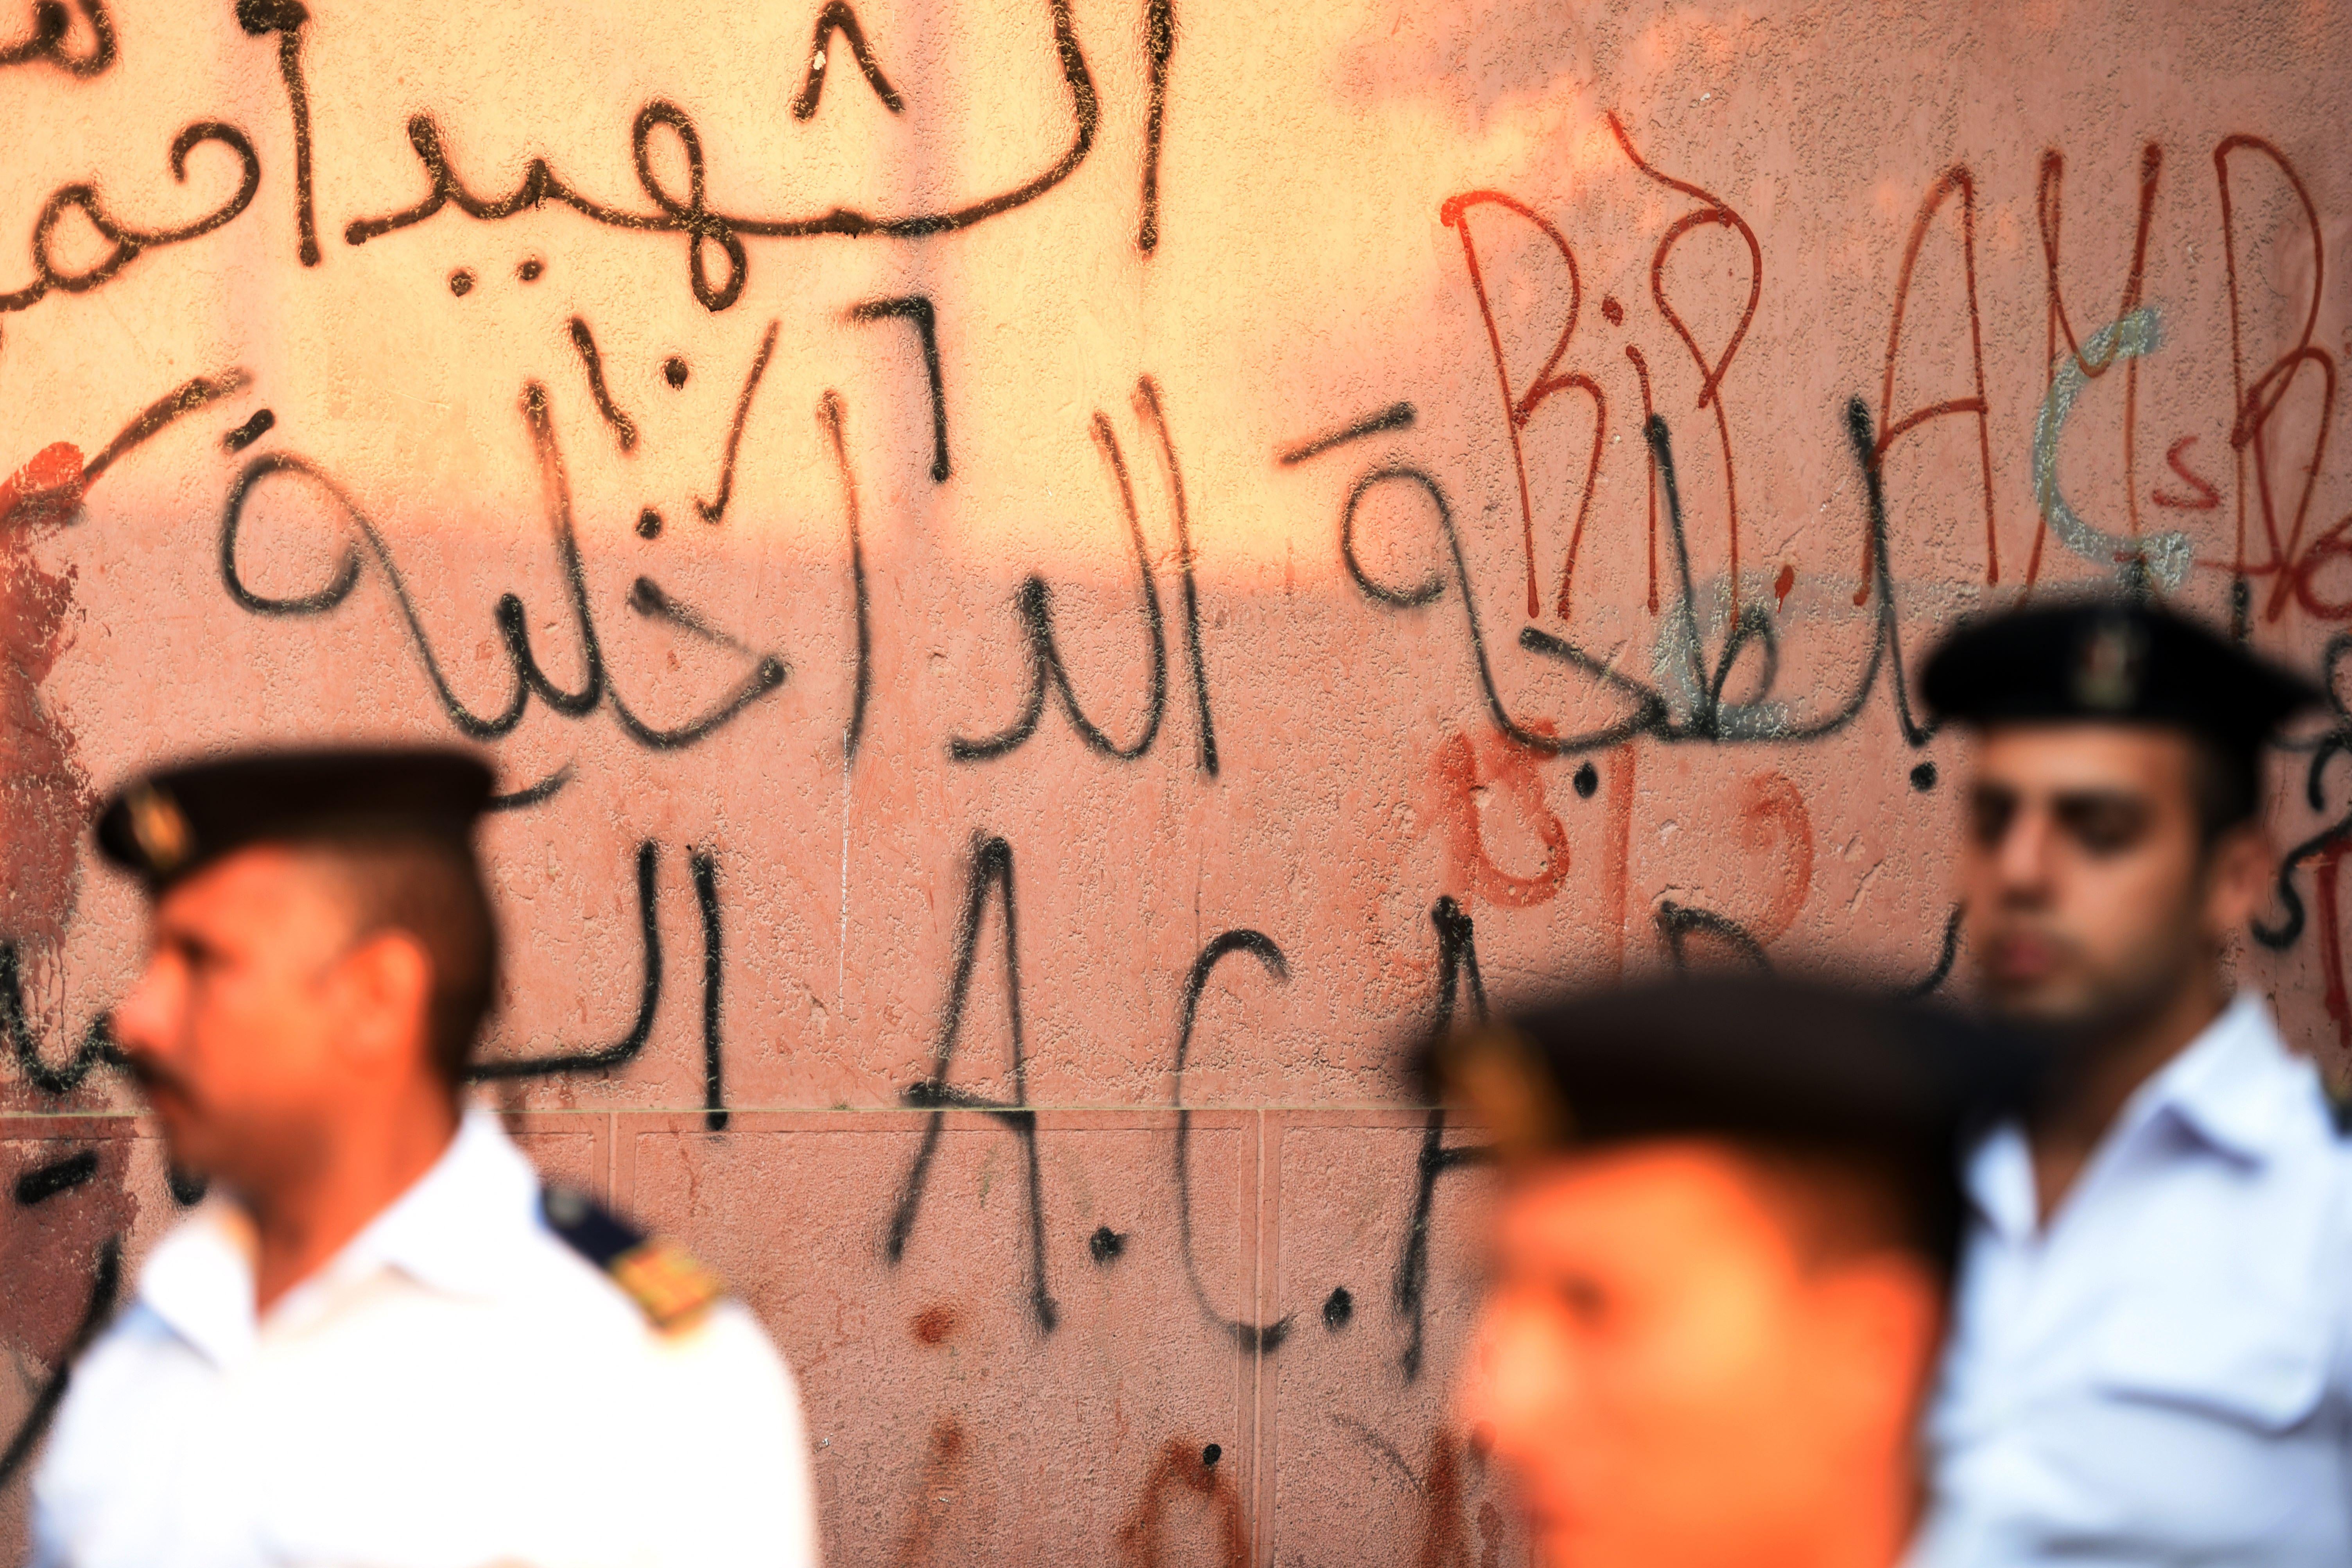 Egyptian police officers stand before a wall covered in graffiti.